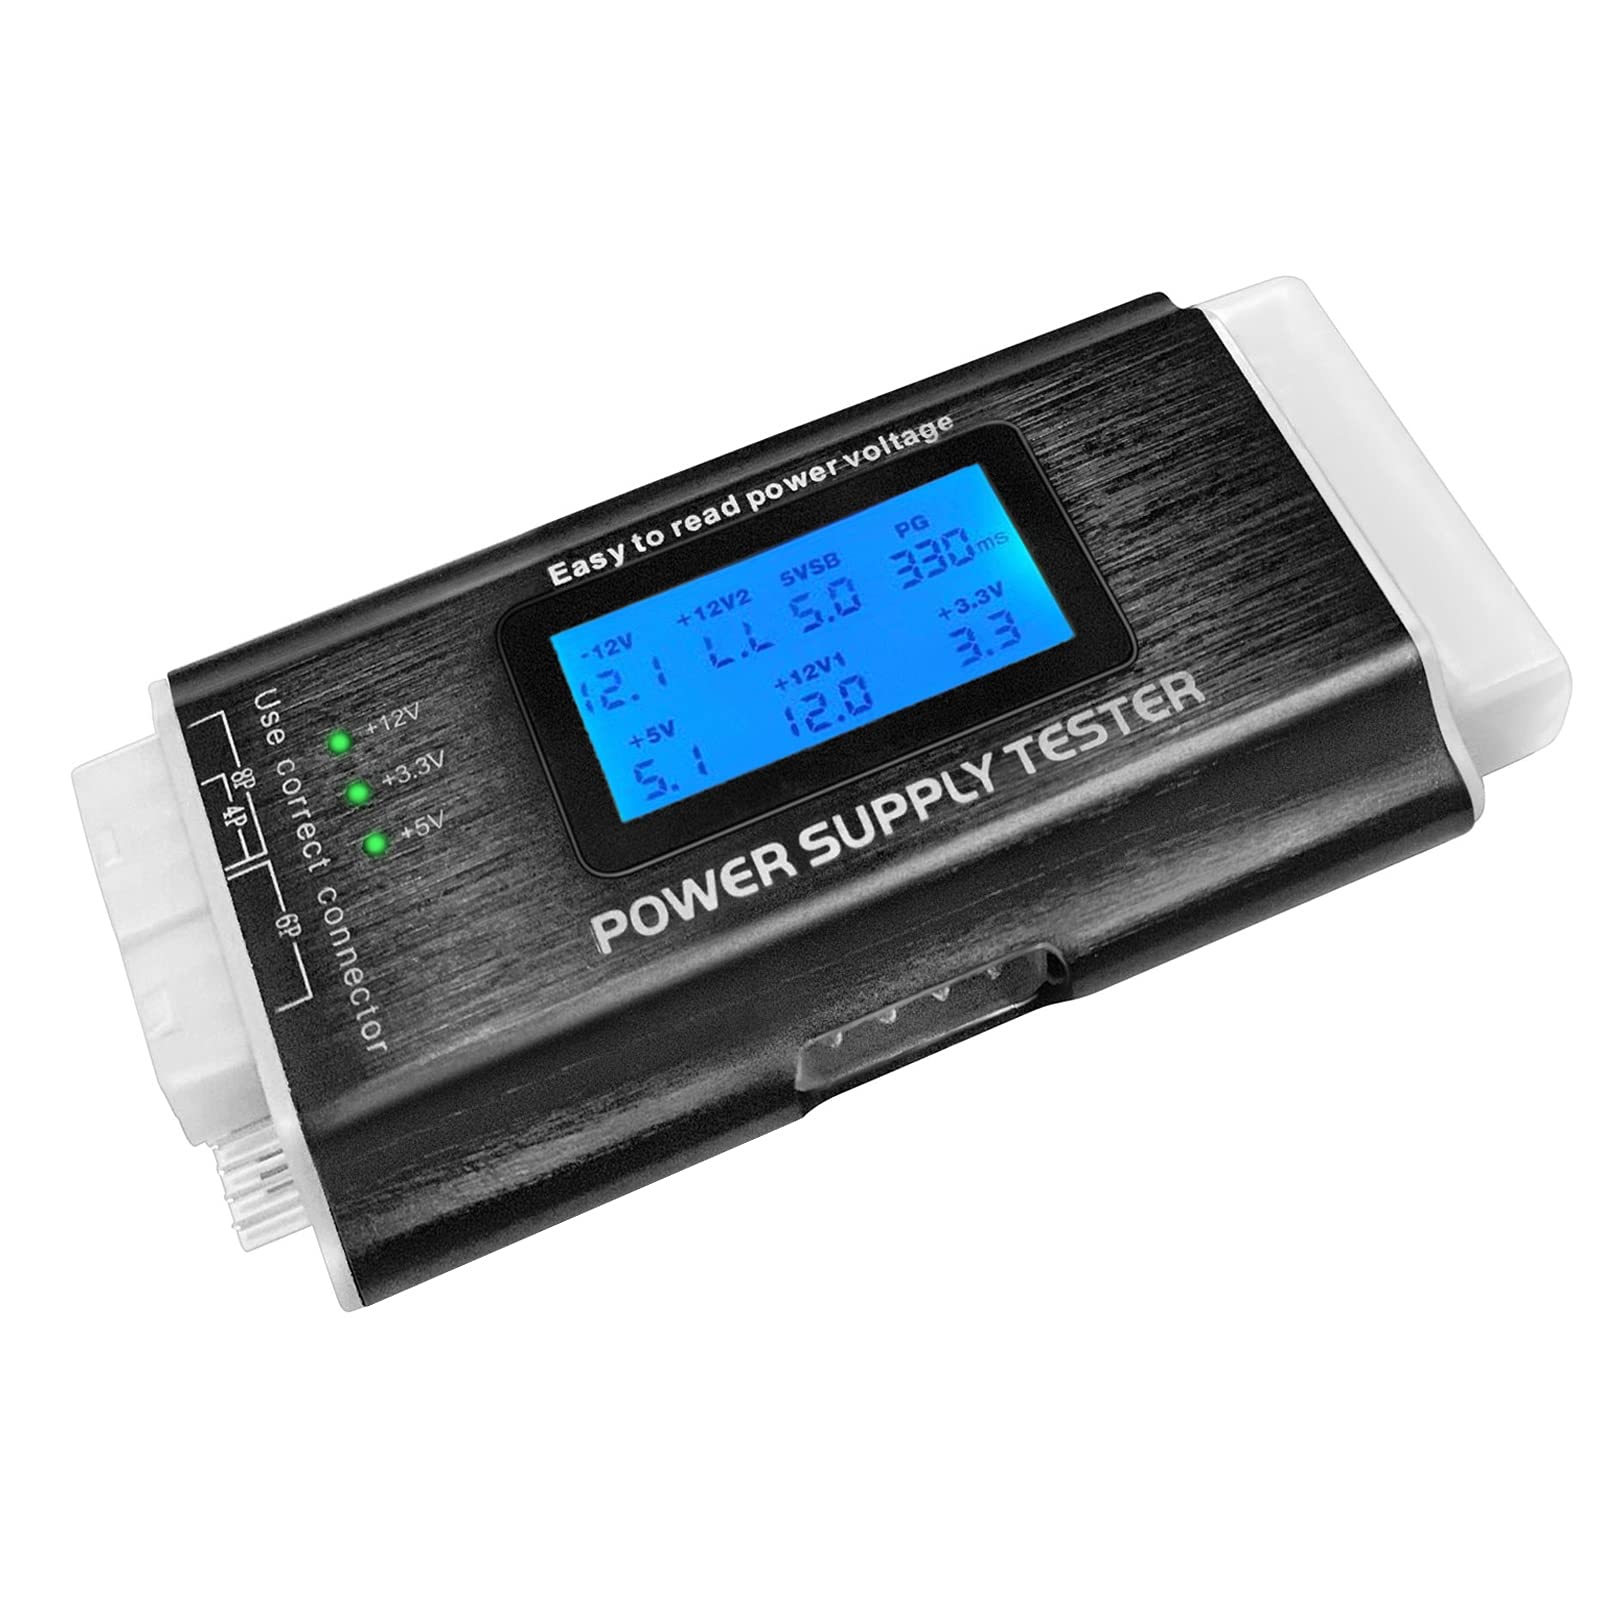 POWER SUPPLY TESTER 20 24 Pin